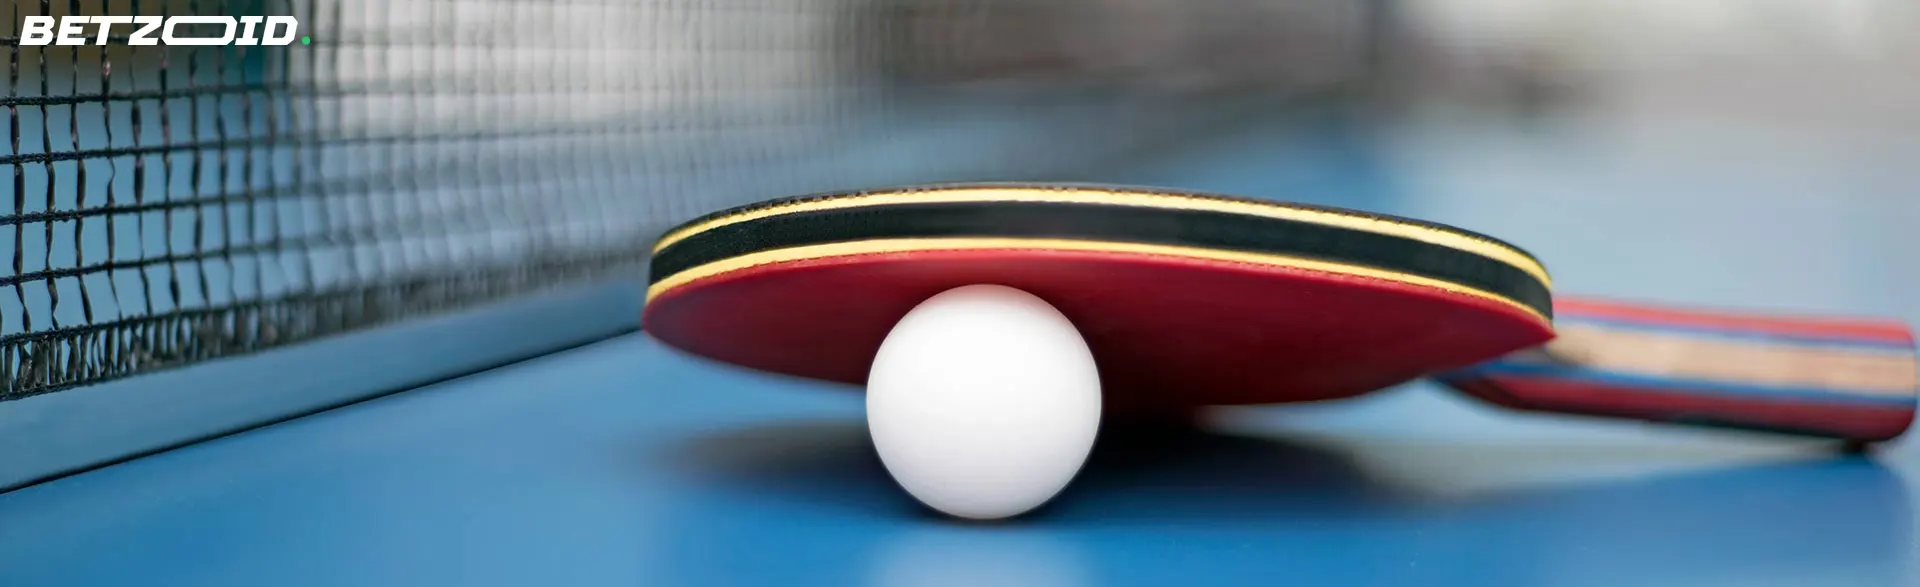 A close-up of a ping pong paddle and ball on a table, representing Ontario betting sites.